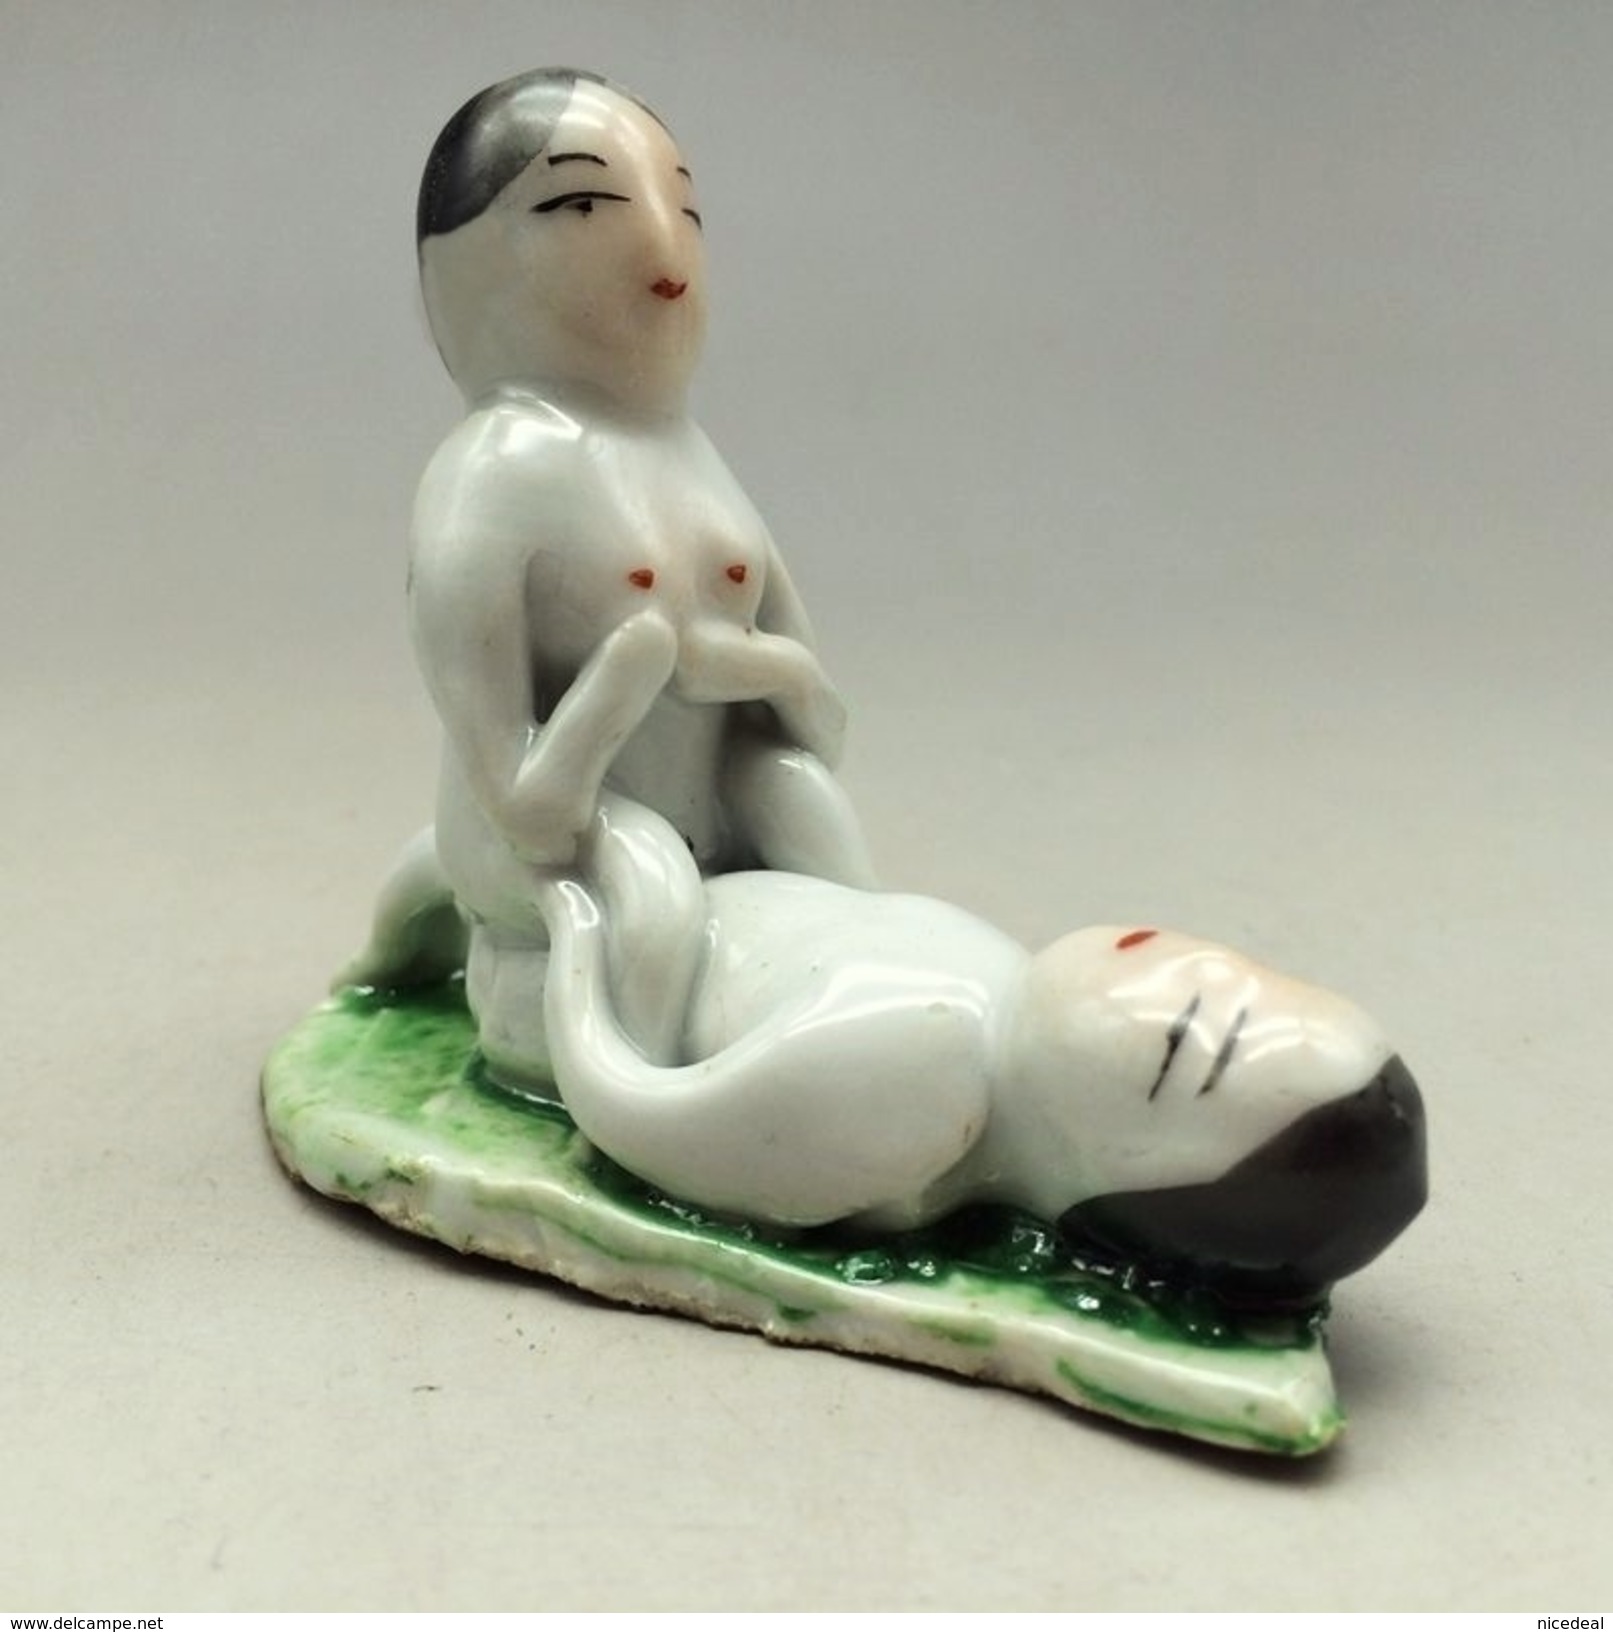 Figurine Statue Scene érotique Chinoise Couple Kamasutra Amour Sexe Chinese Man Woman Kama Sutra Love Erotic Position - Art Asiatique